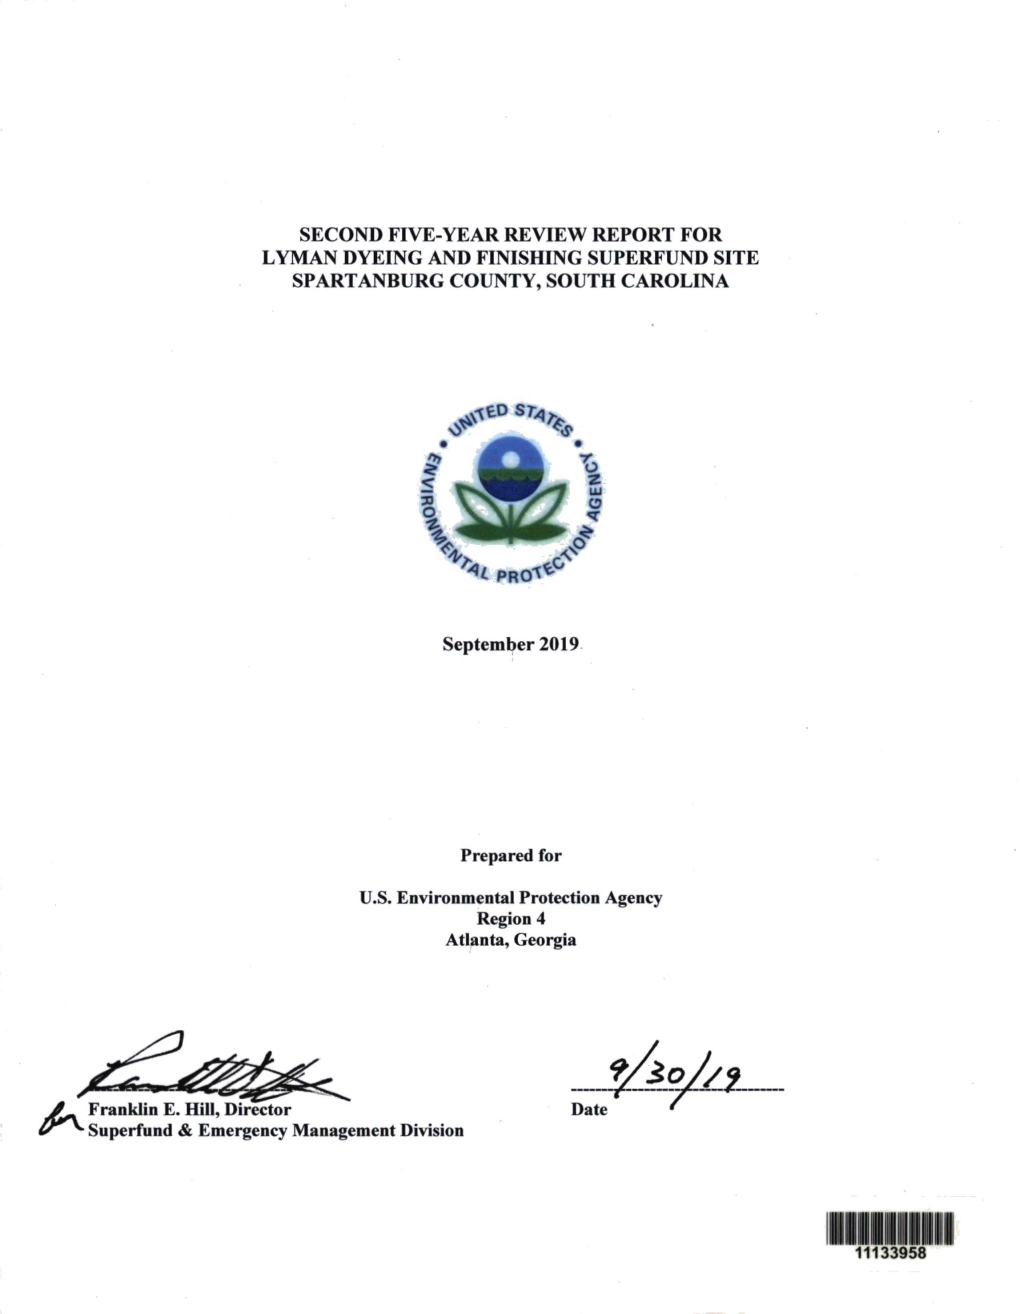 Second Five Year Review Report for Lyman Dyeing and Finishing Superfund Site, Spartanburg County, South Carolina